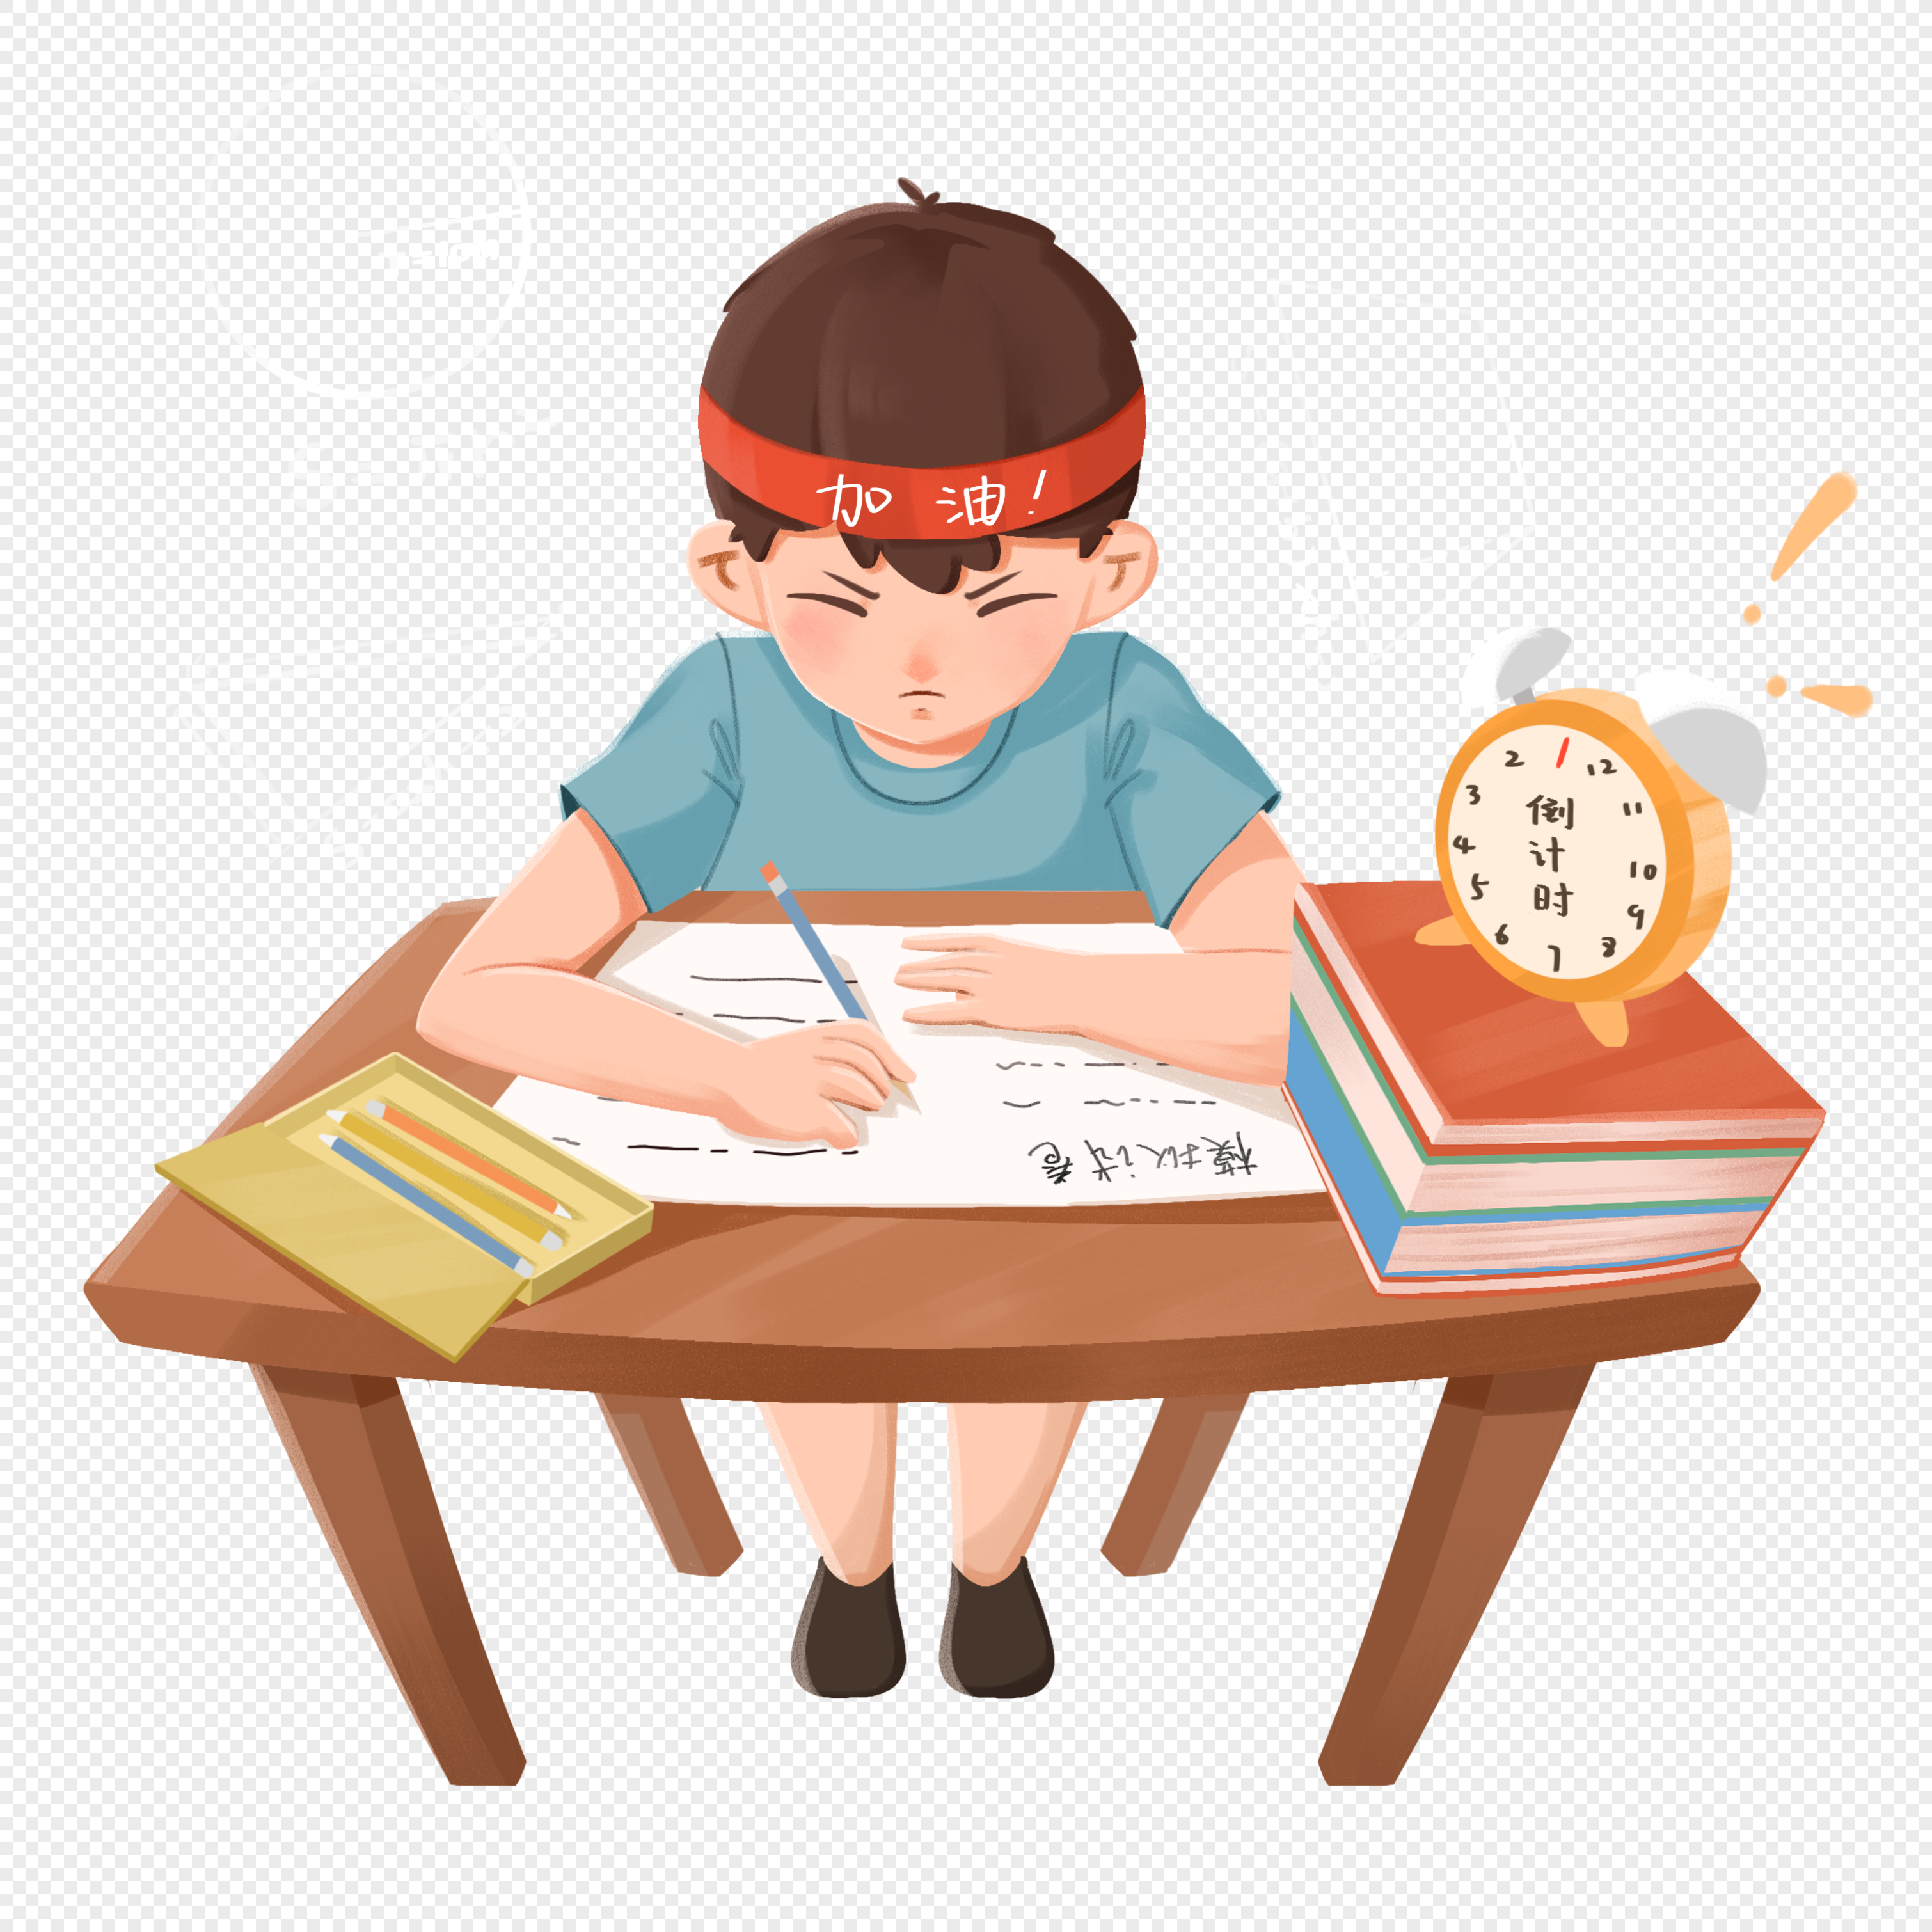 Boy studying at the desk, win, study time, book png transparent image